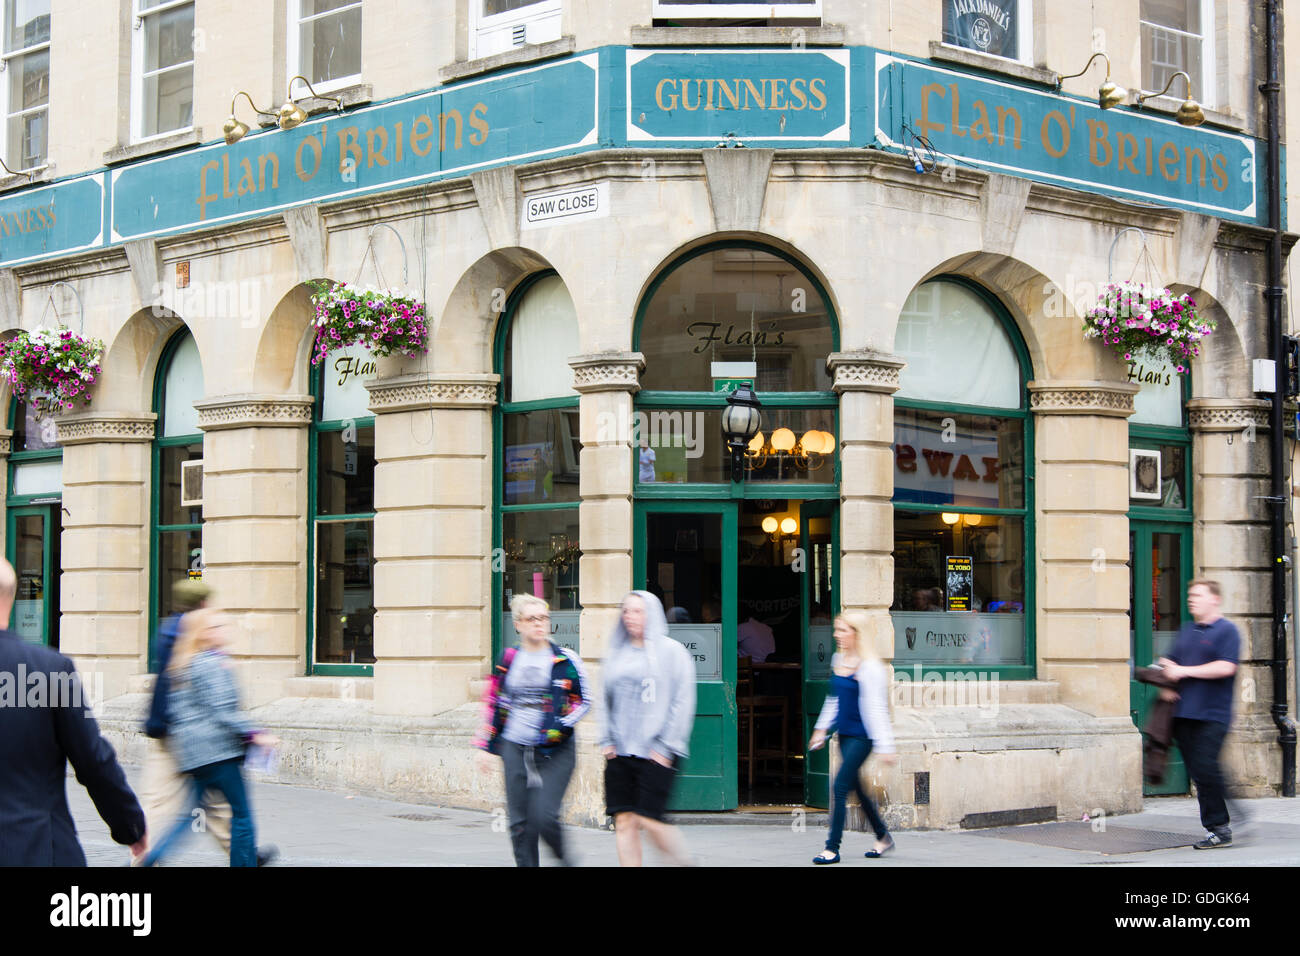 Flan O'Briens Public House. Pub on Westgate Street in the UNESCO World Heritage City of Bath, in Somerset, England Stock Photo